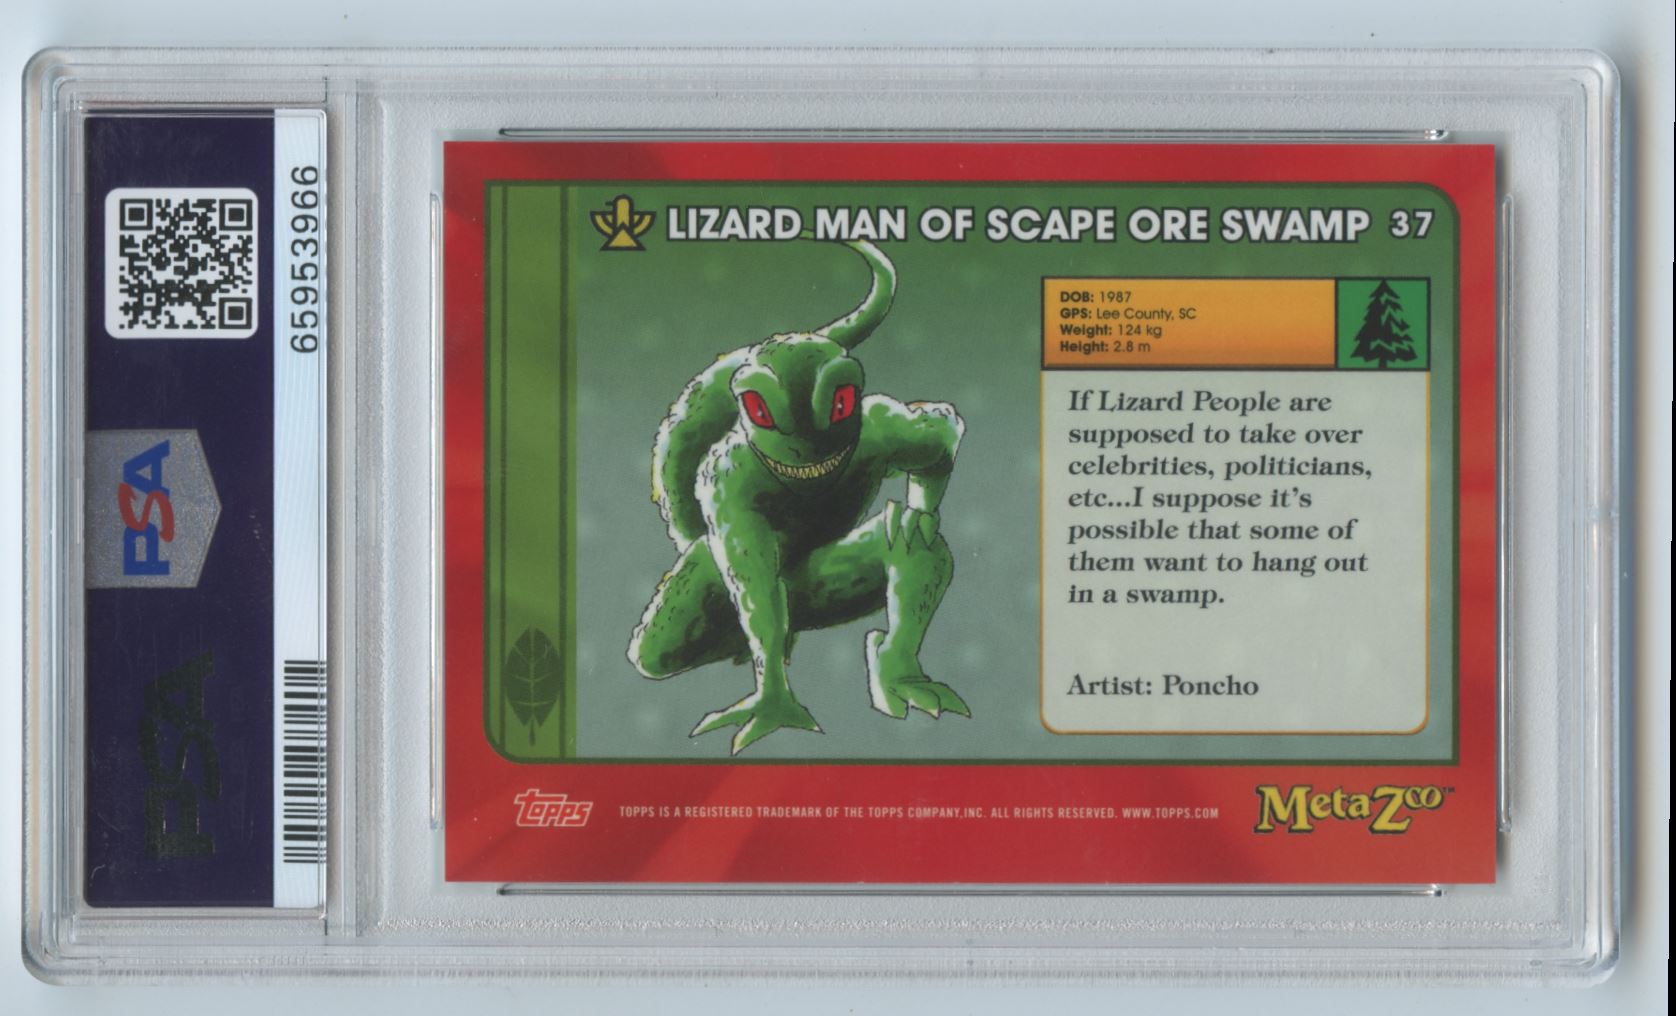 2021 Topps Metazoo Cryptid Nation Series Zero Lizard Man Of Scape Ore Swamp #37 card back image